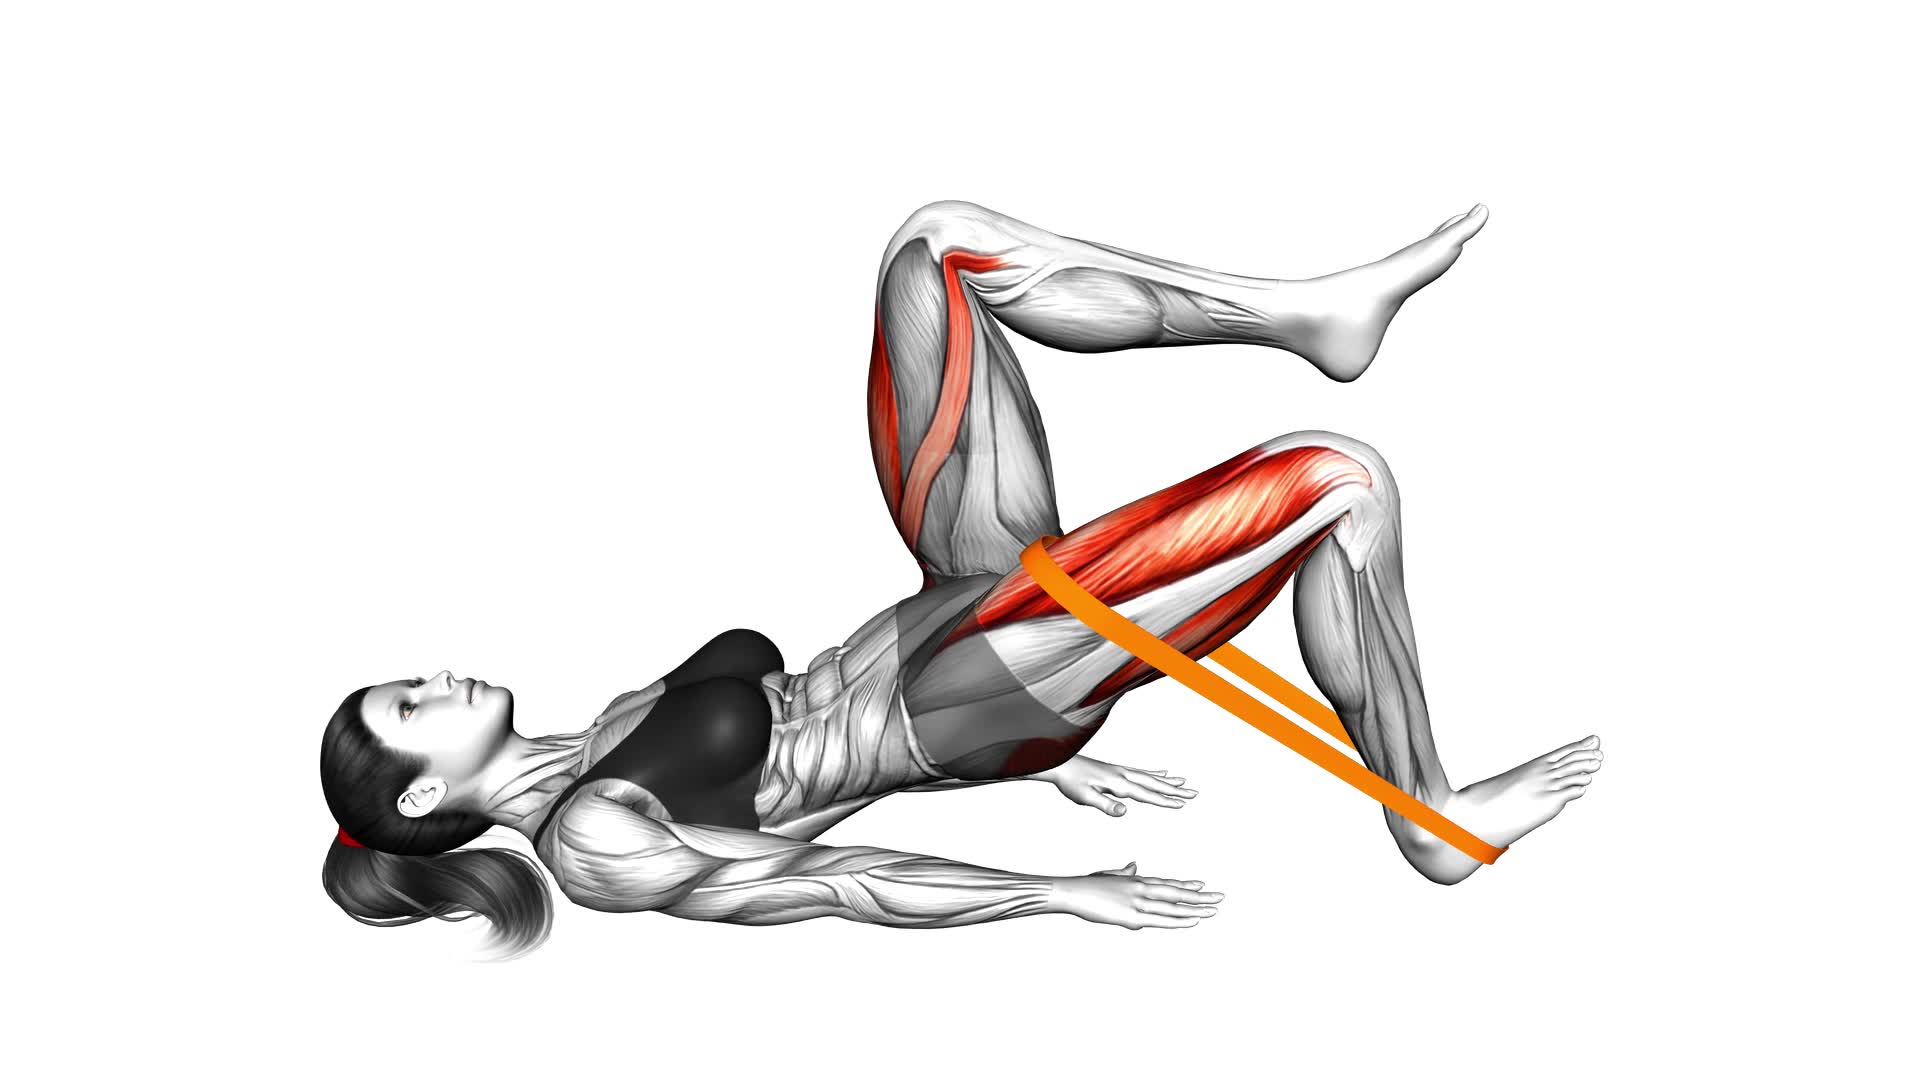 Resistance Band One Leg Glute Bridge (female) - Video Exercise Guide & Tips